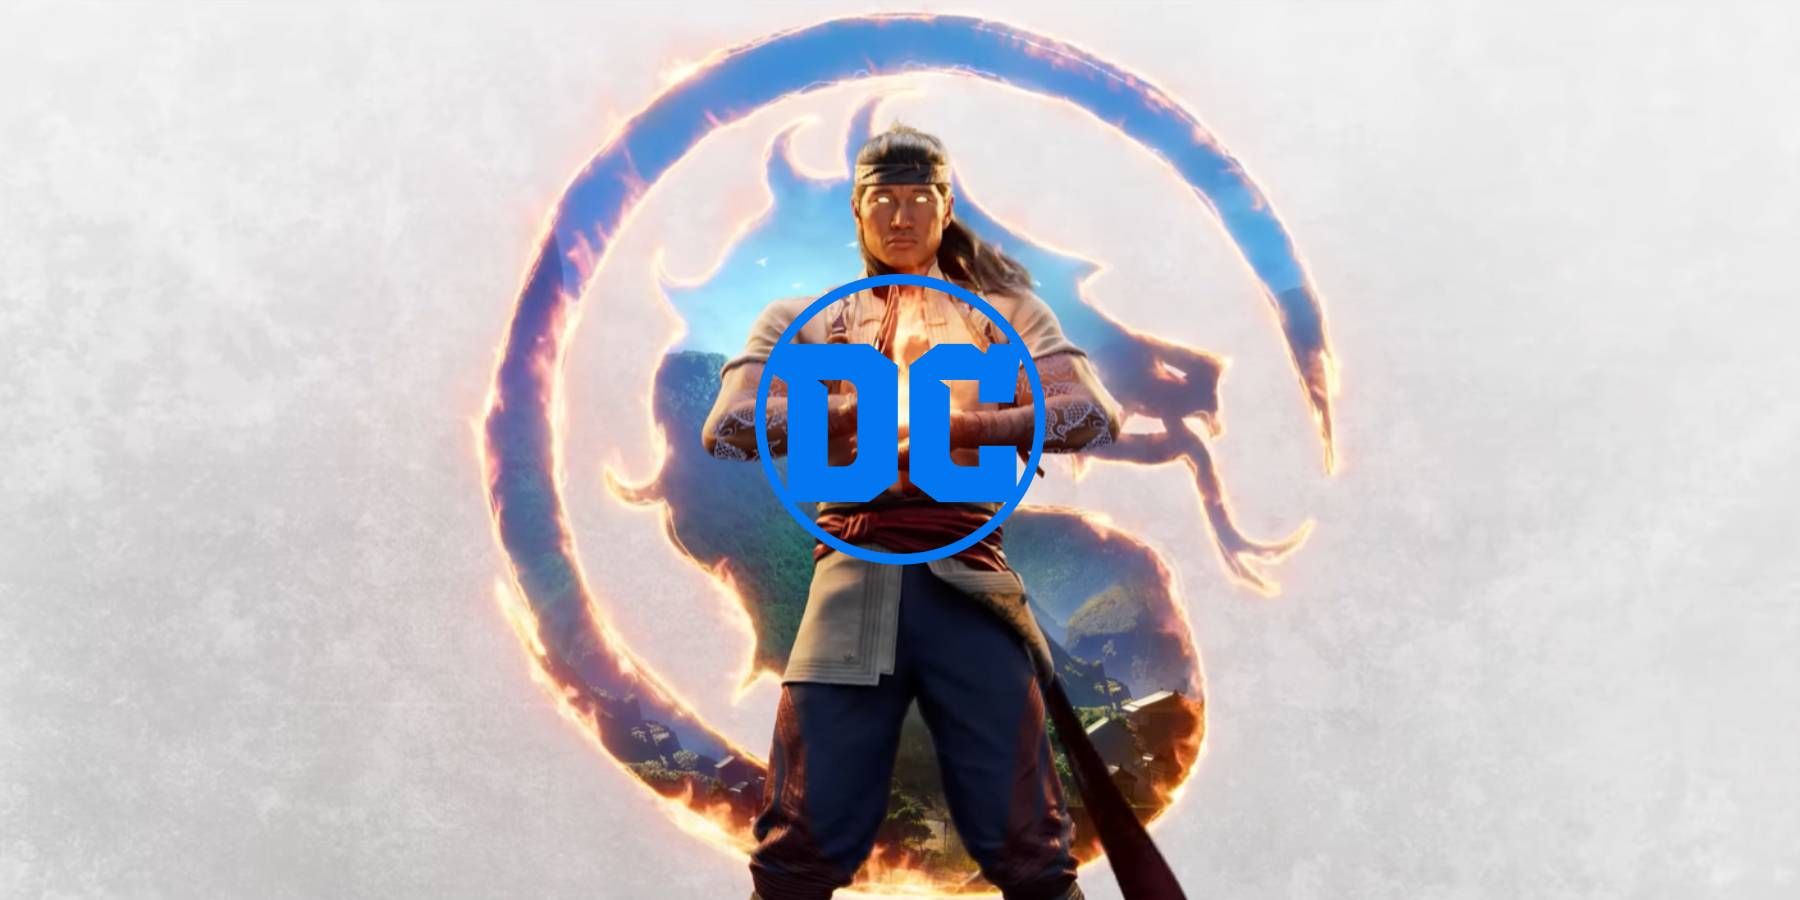 Liu Kang from the end of Mortal Kombat 1's trailer with the DC logo